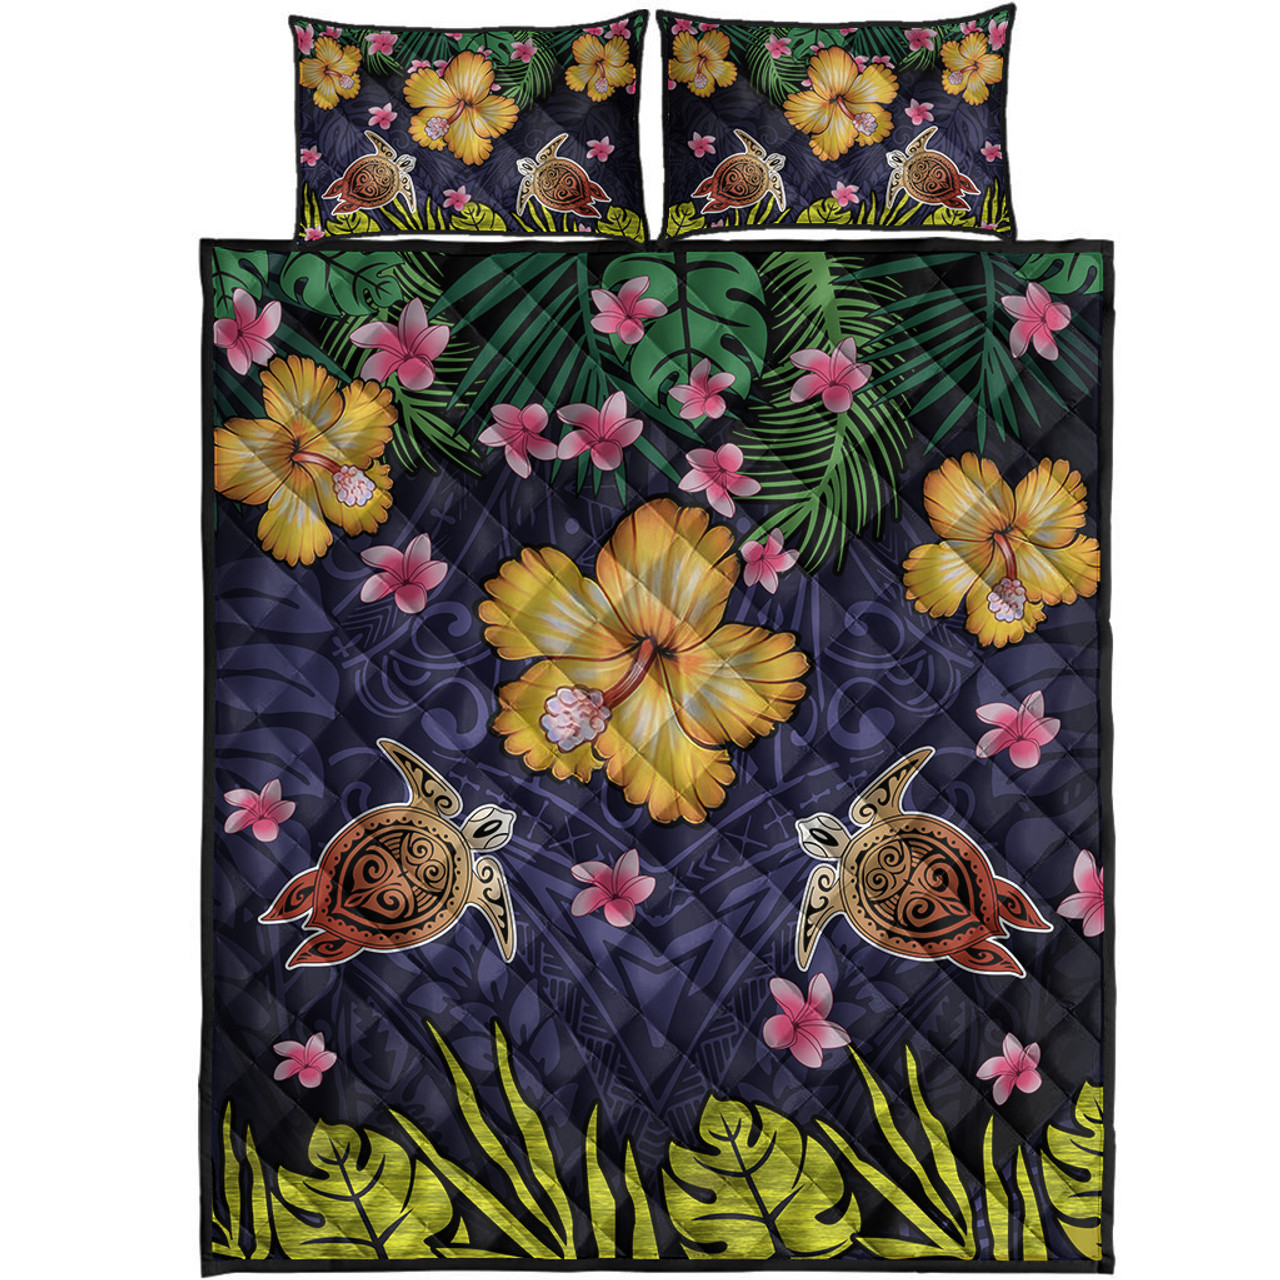 Hawaii Quilt Bed Set Polynesian Patterns Turtle Couple Hibiscus Plumeria Flowers